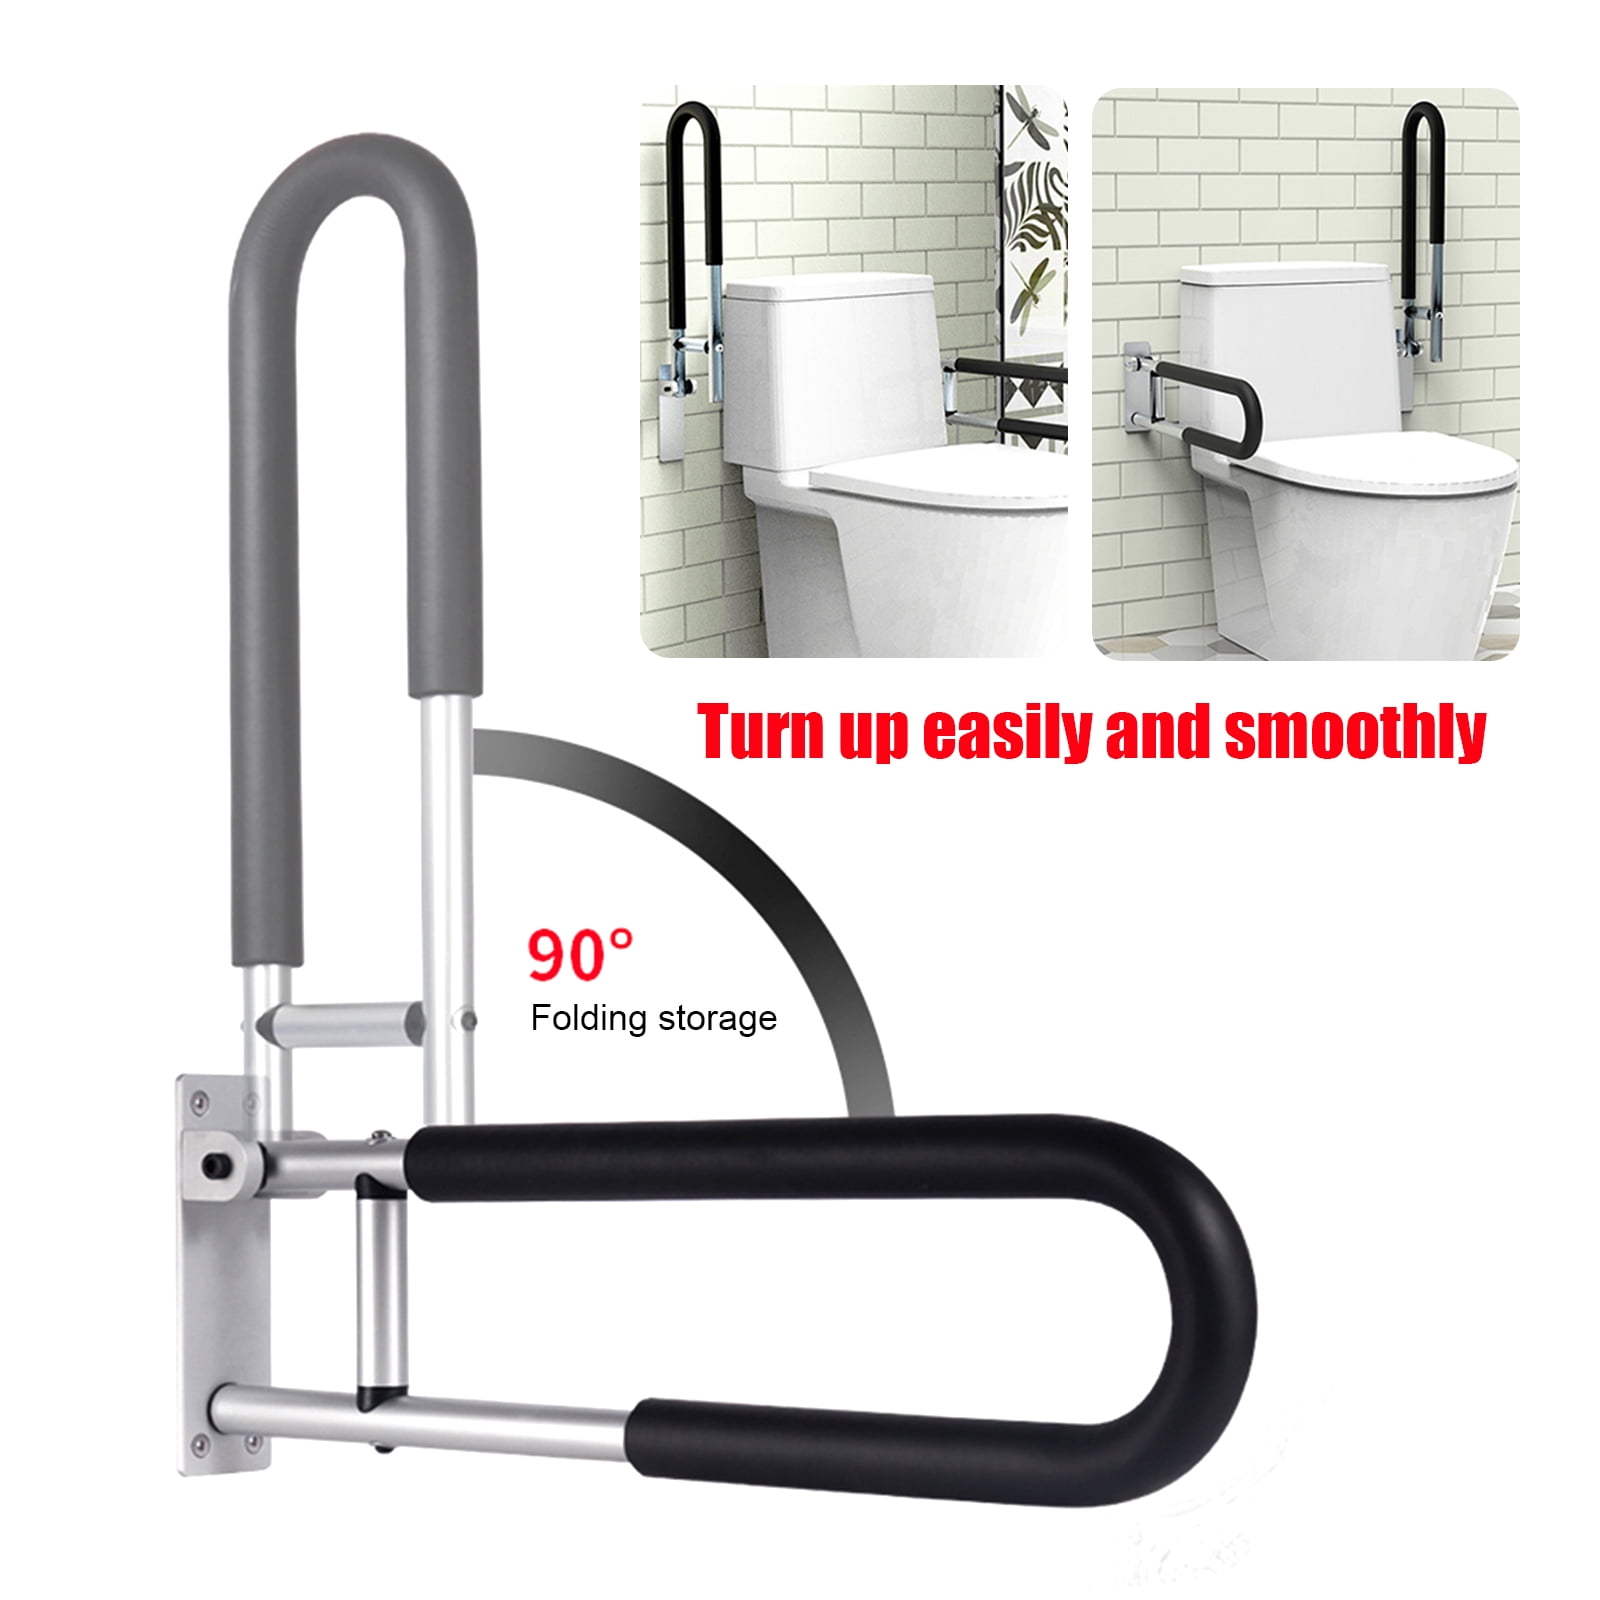 Two Color U-shaped Collapsible Stainless Steel Non-slip Safety Handle Disabled Elderly Barrier-free Handrail Bathroom Shower for Tub, Bathroom Handrail Bathroom Balance Bar Grab Bar Shower Handle 